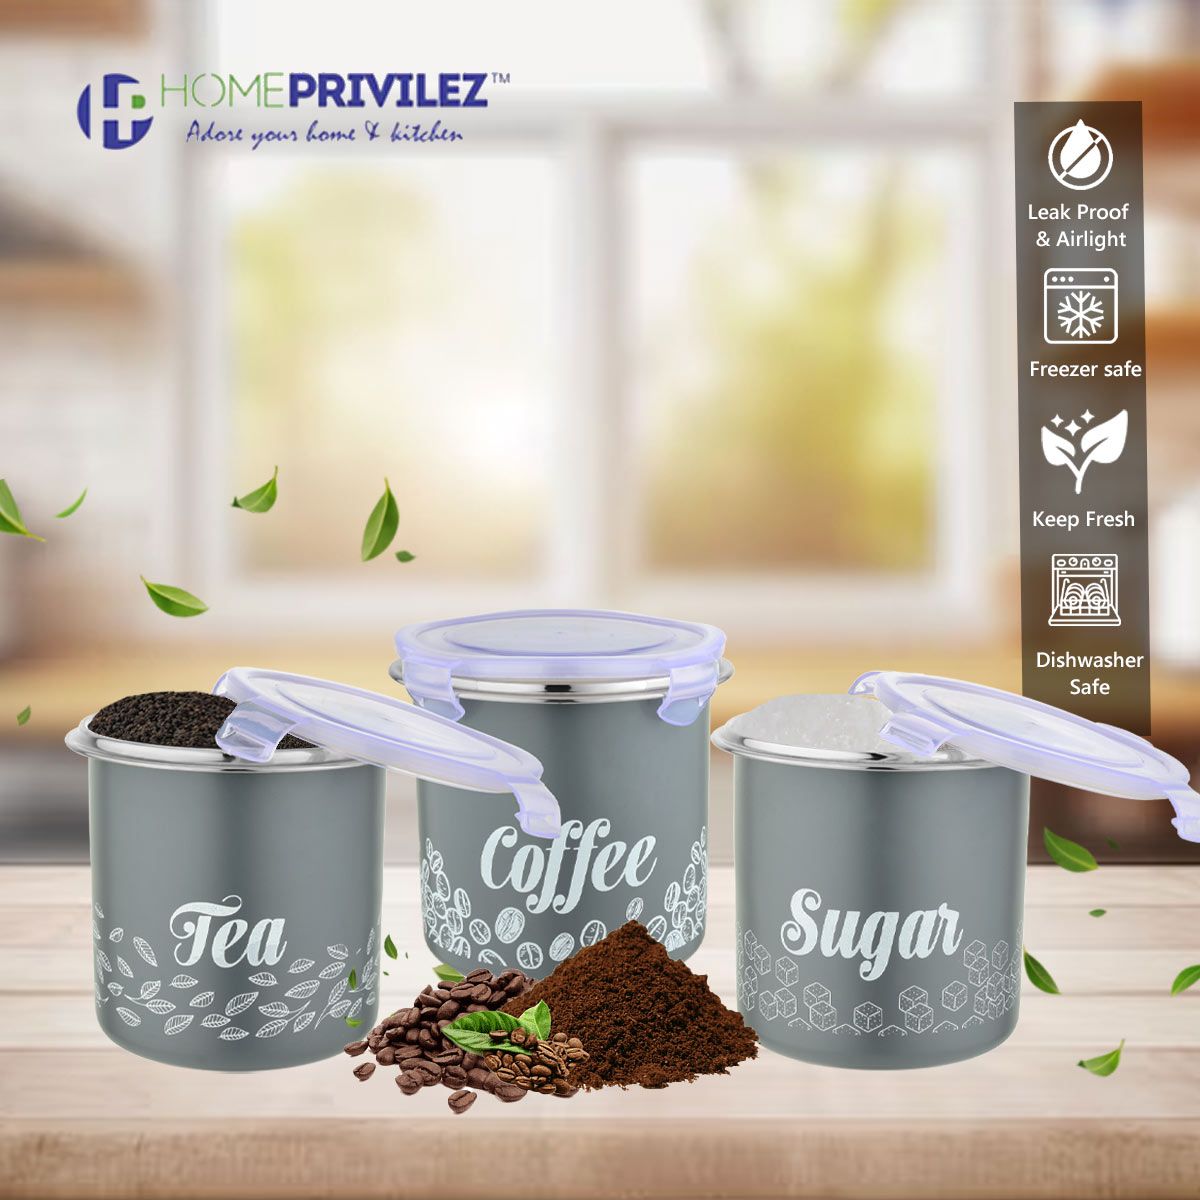 “Flip & Seal “Stainless Steel Air Tight Storage Container- Tea, Coffee & Sugar Set of 3 in Grey colour(1350mLx3)